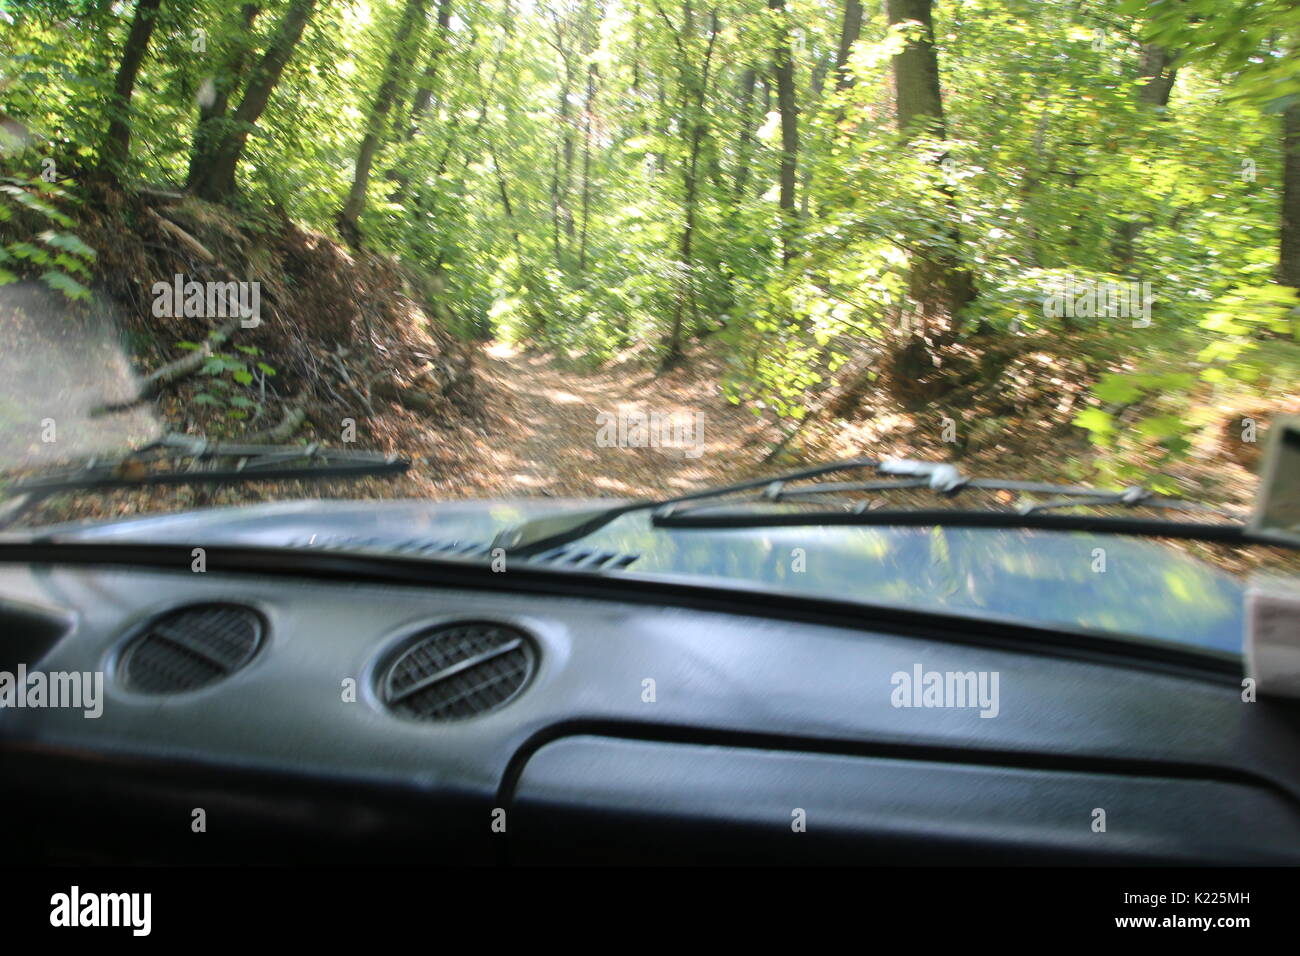 car driving nto forest, travel concept, blurred background photo Stock Photo